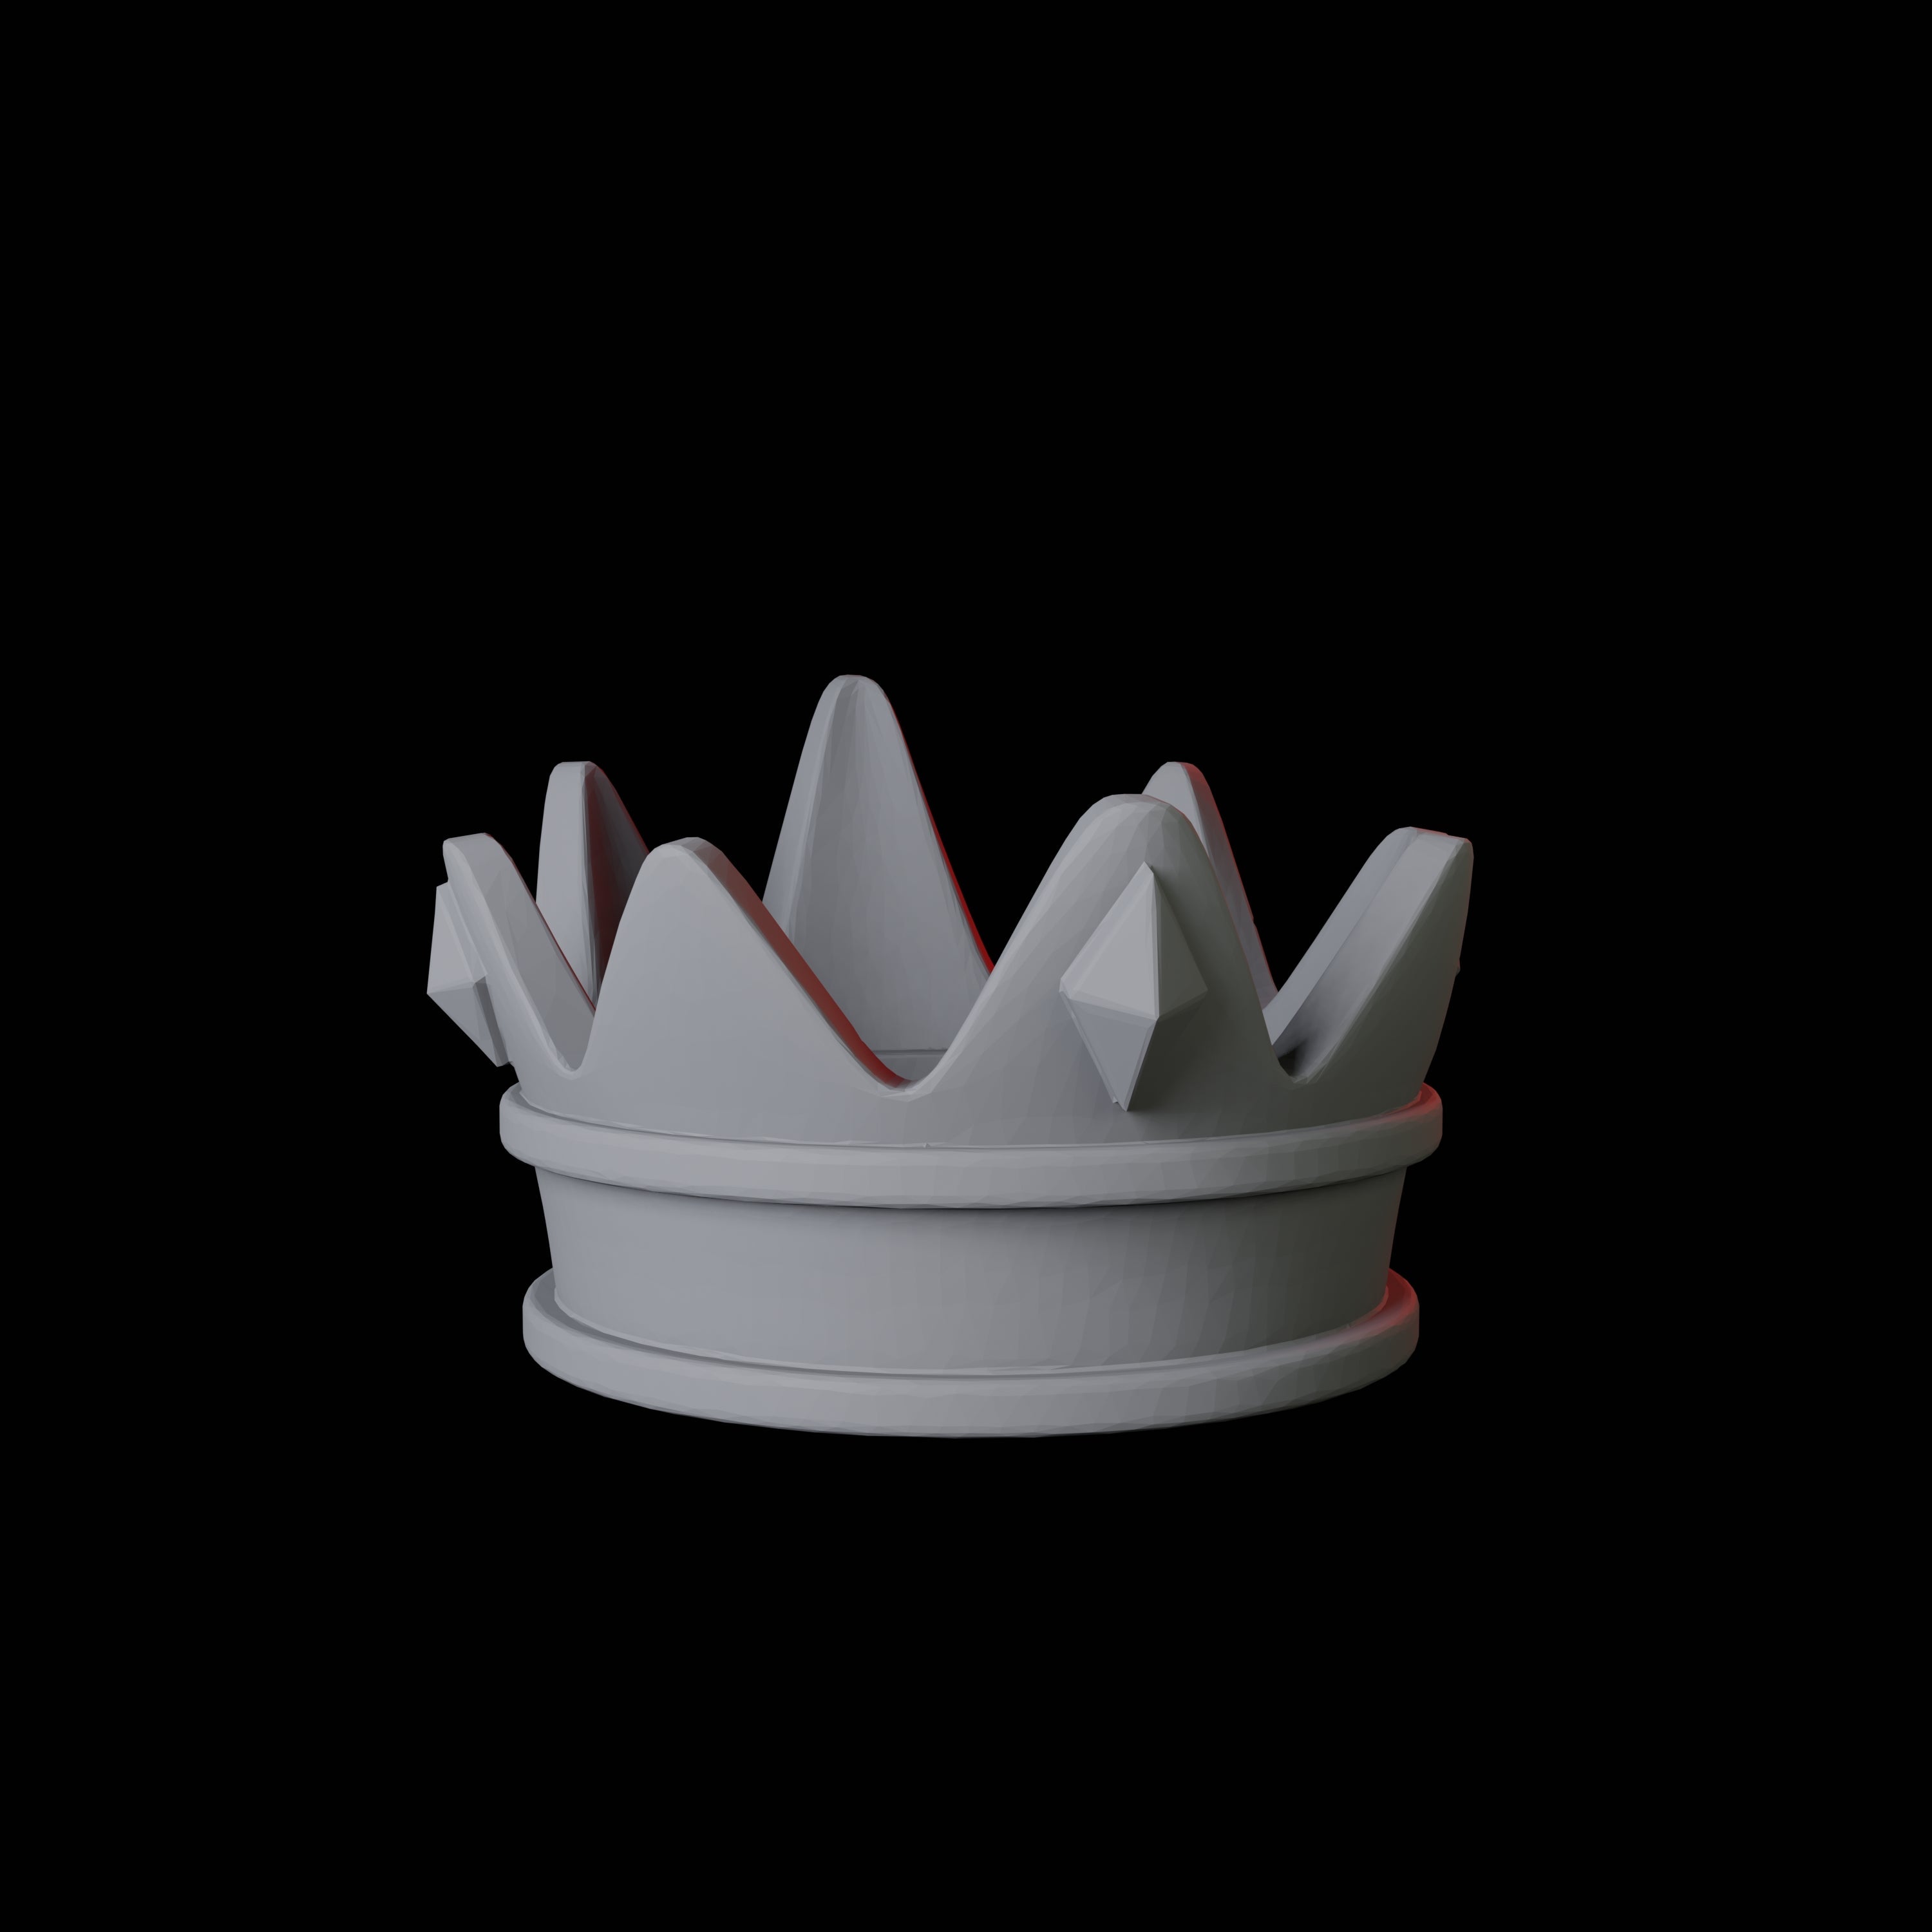 Royal Crown Miniature for Dungeons and Dragons, Pathfinder or other TTRPGs